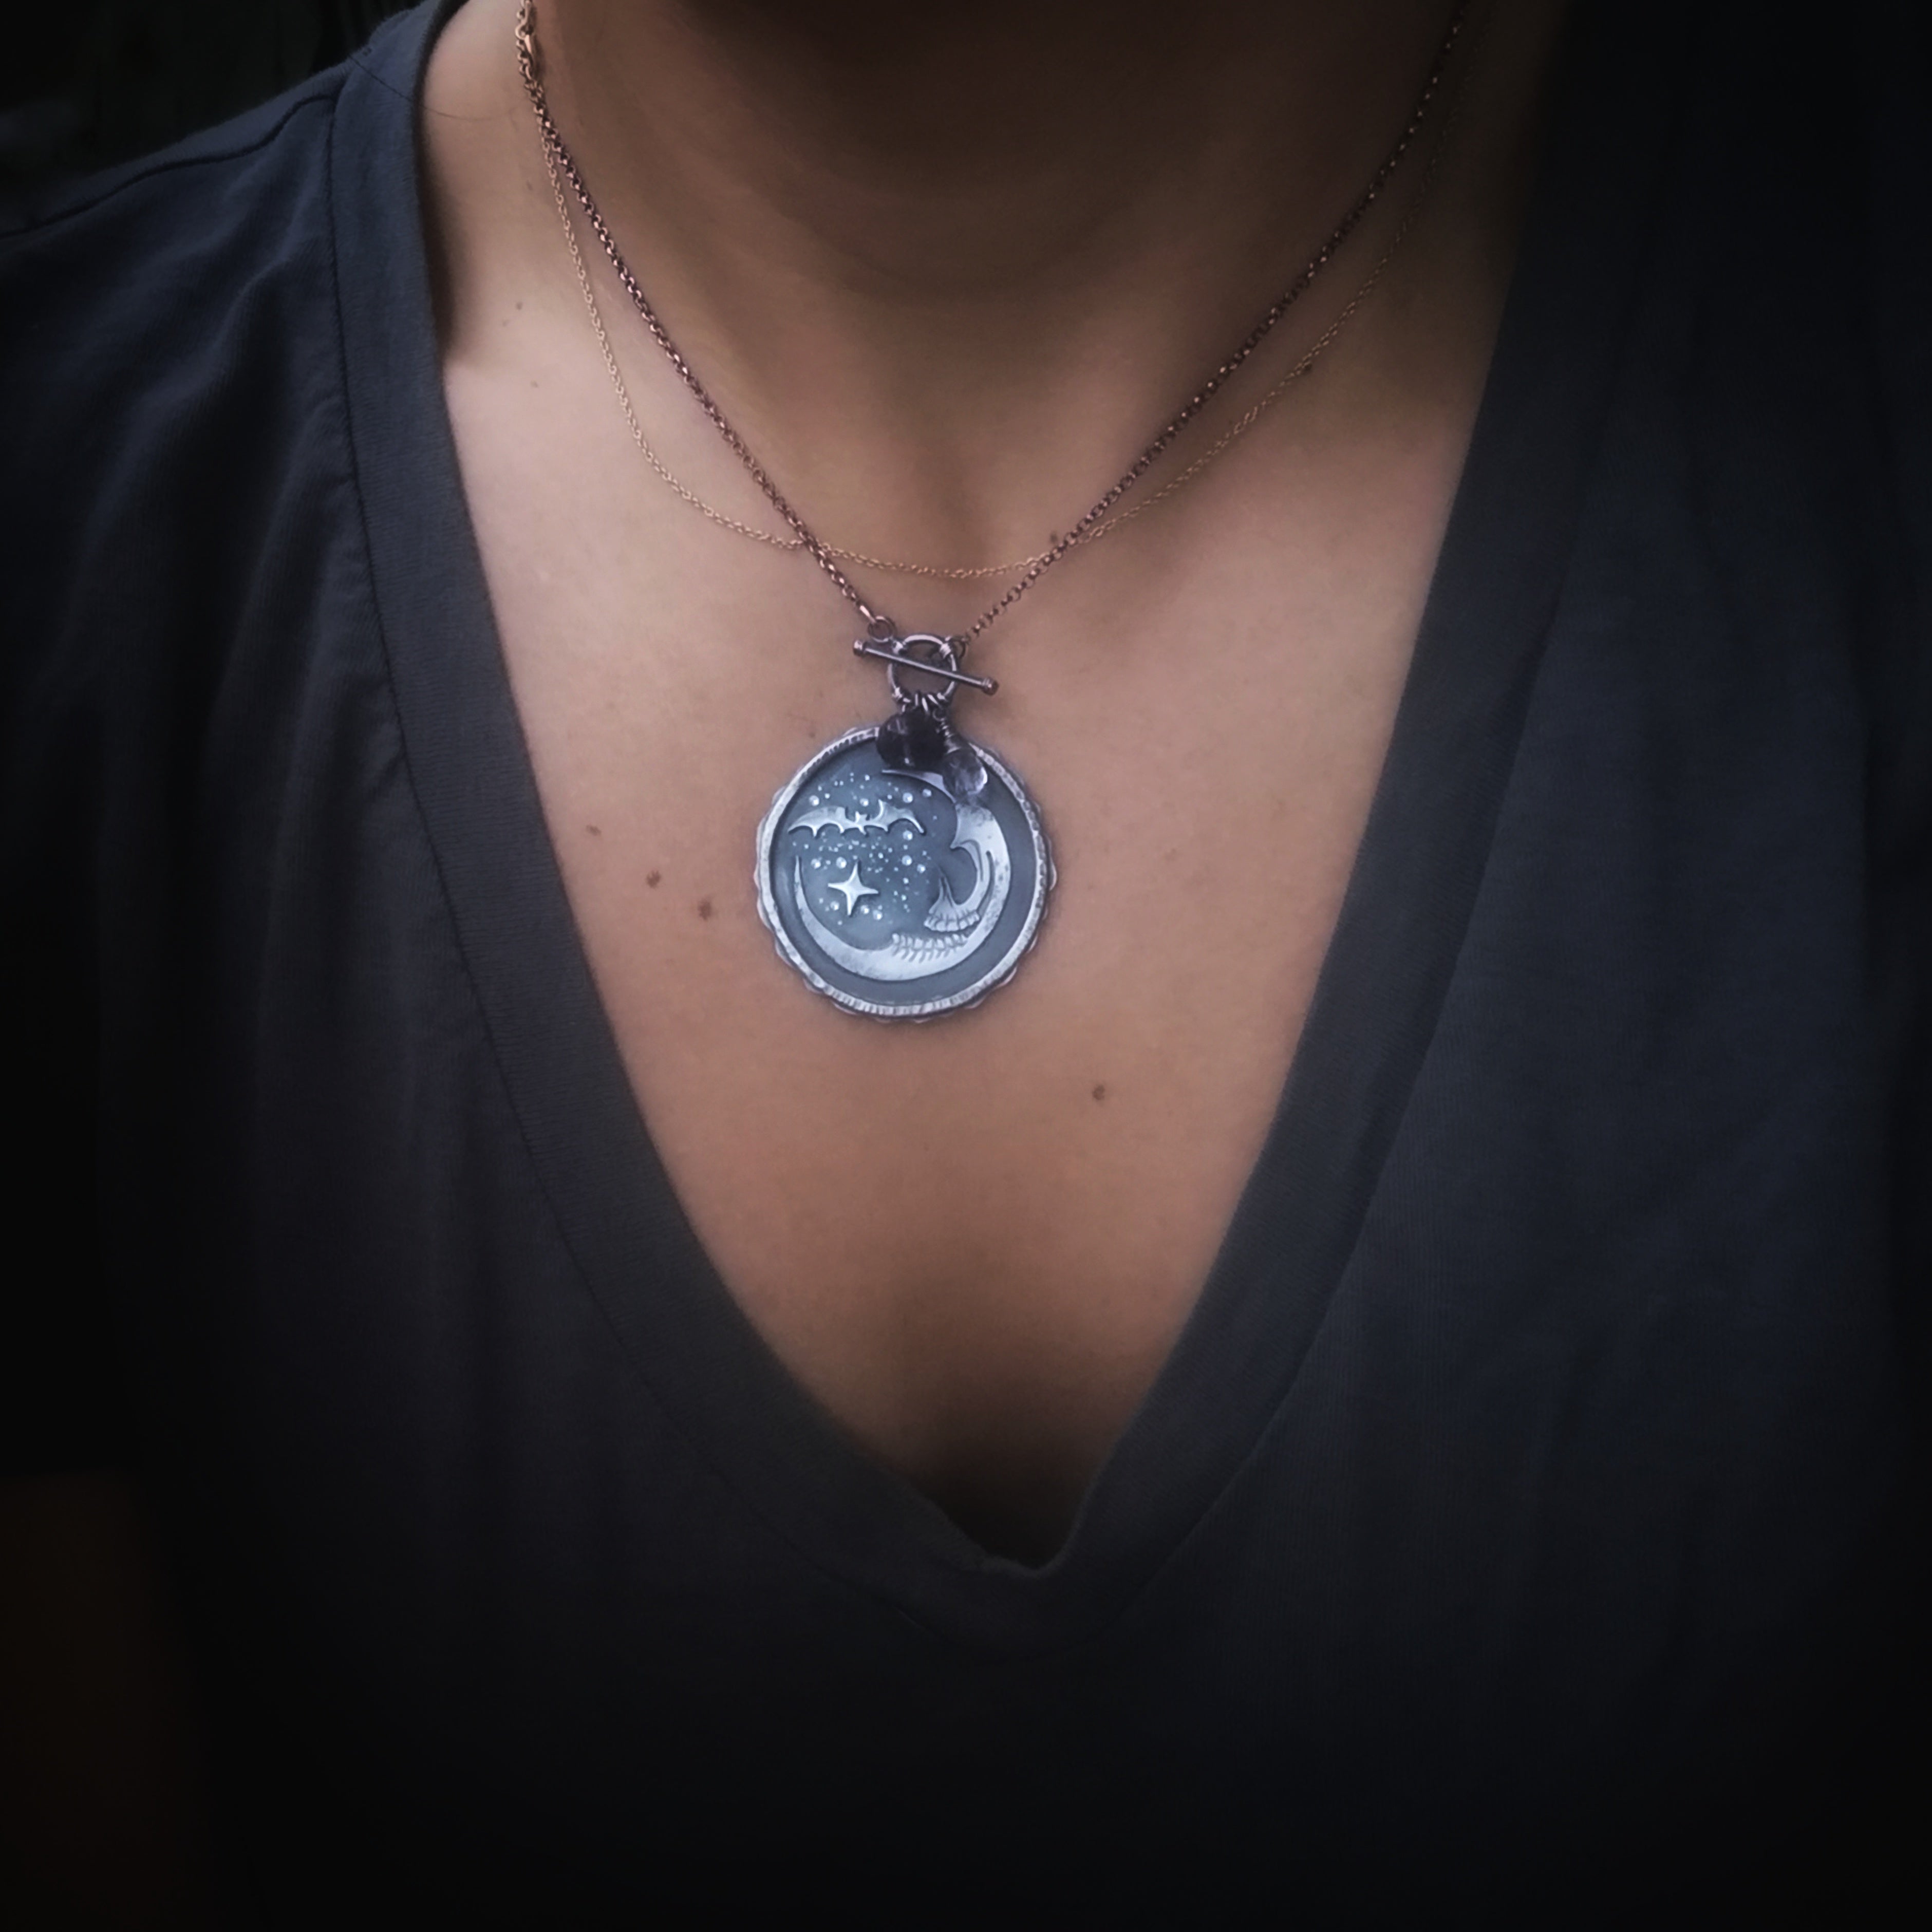 The Skull Moon Necklace